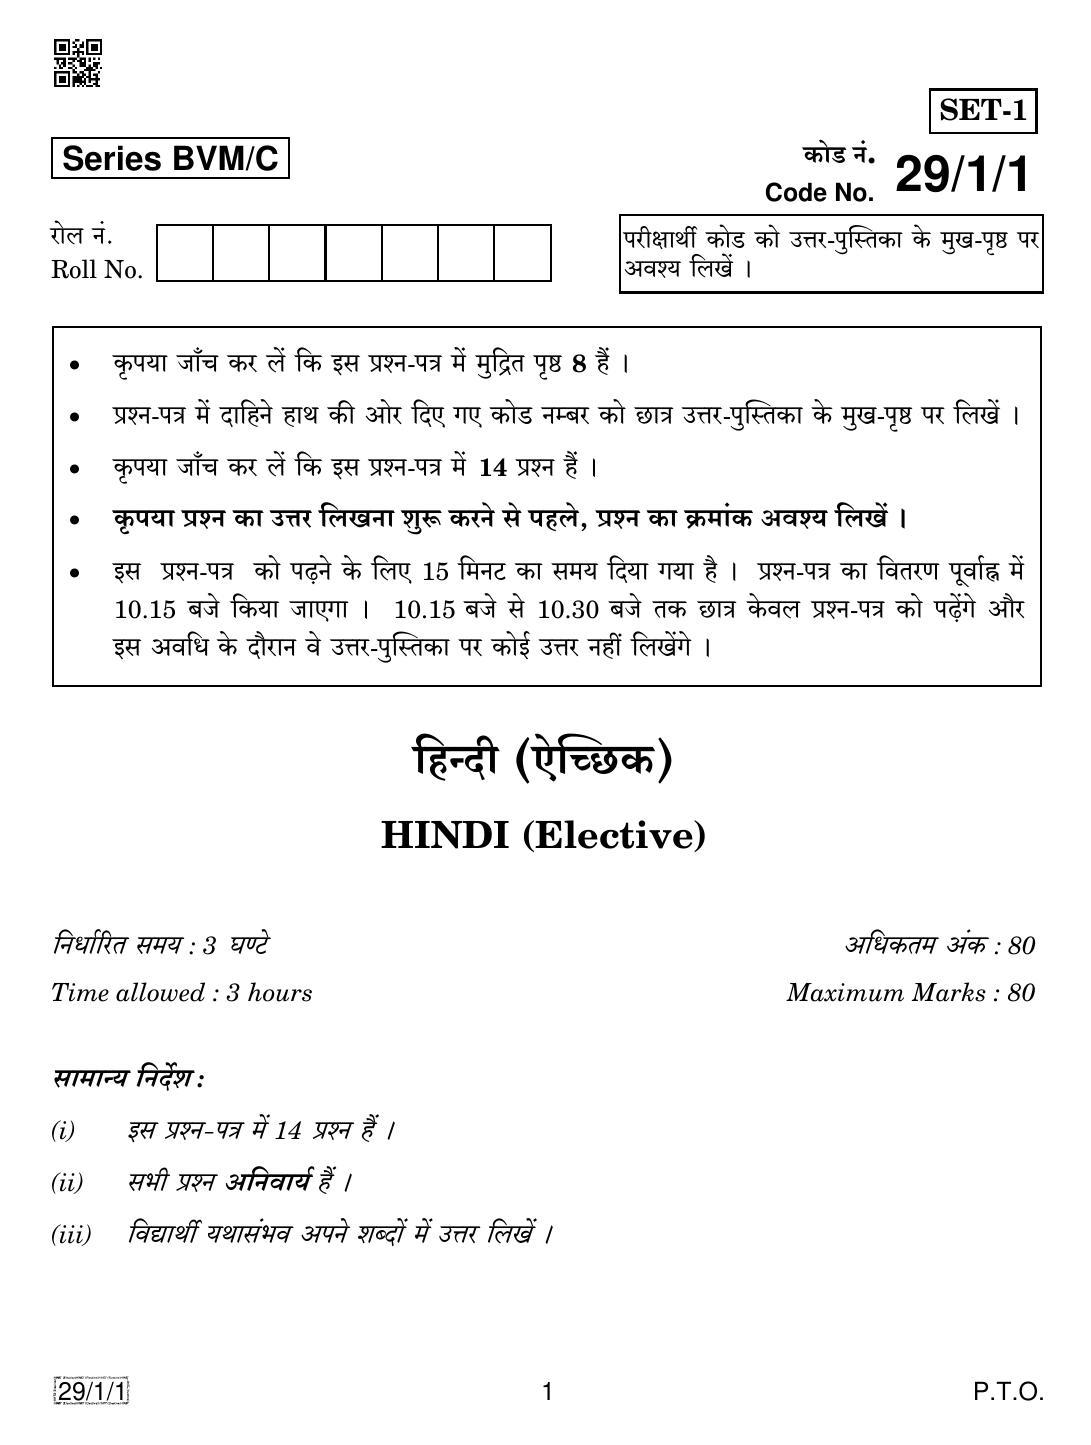 CBSE Class 12 29-1-1 HINDI ELECTIVE 2019 Compartment Question Paper - Page 1